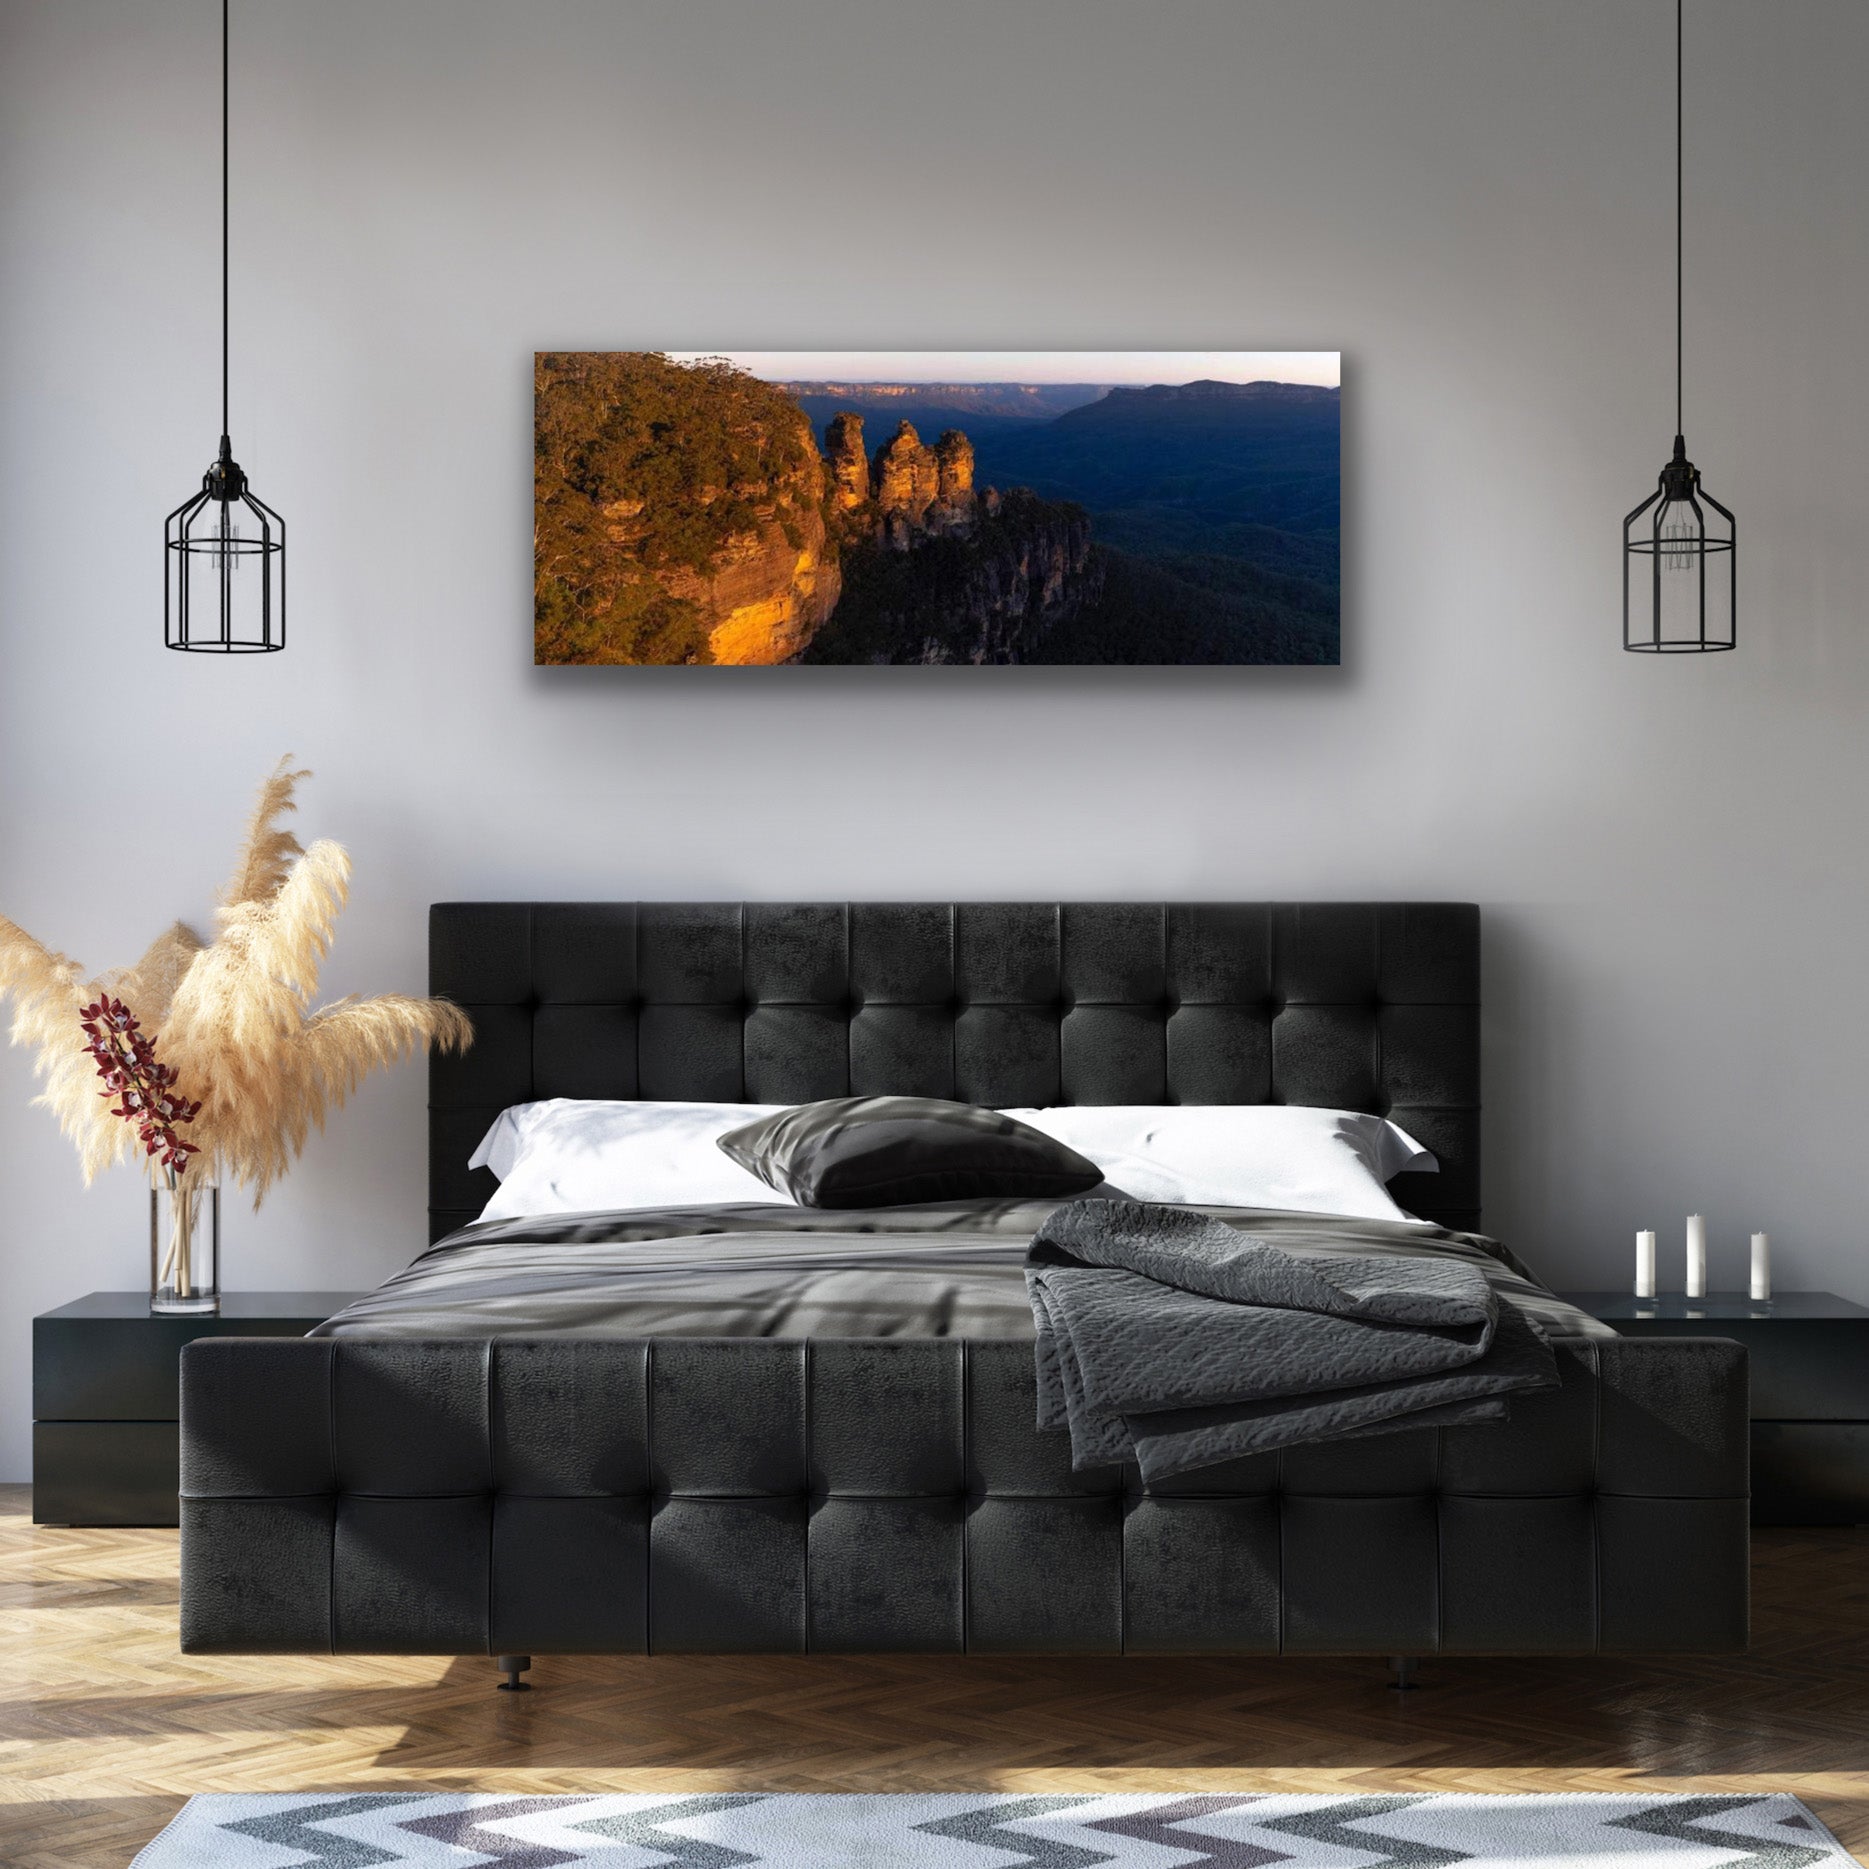 Bedroom Wall Art - what should you display on the walls?